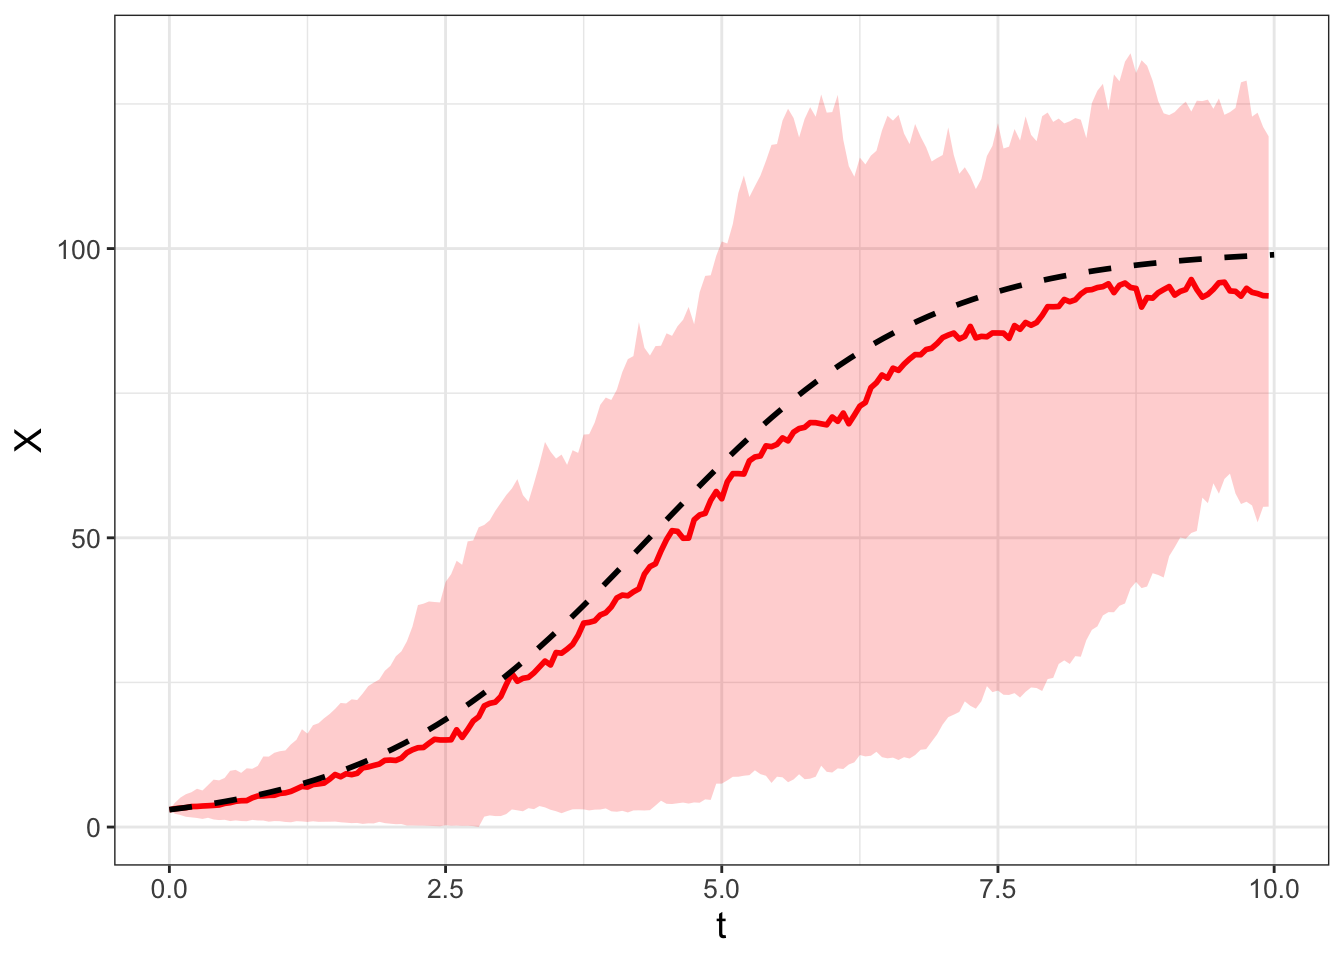 Ensemble average of 100 simulations of Equation \@ref(eq:log-markov-26) (in red). The red line represents the median with the shading the 95% confidence interval. For comparison, the deterministic solution to the logistic differential equation is the dashed black curve.